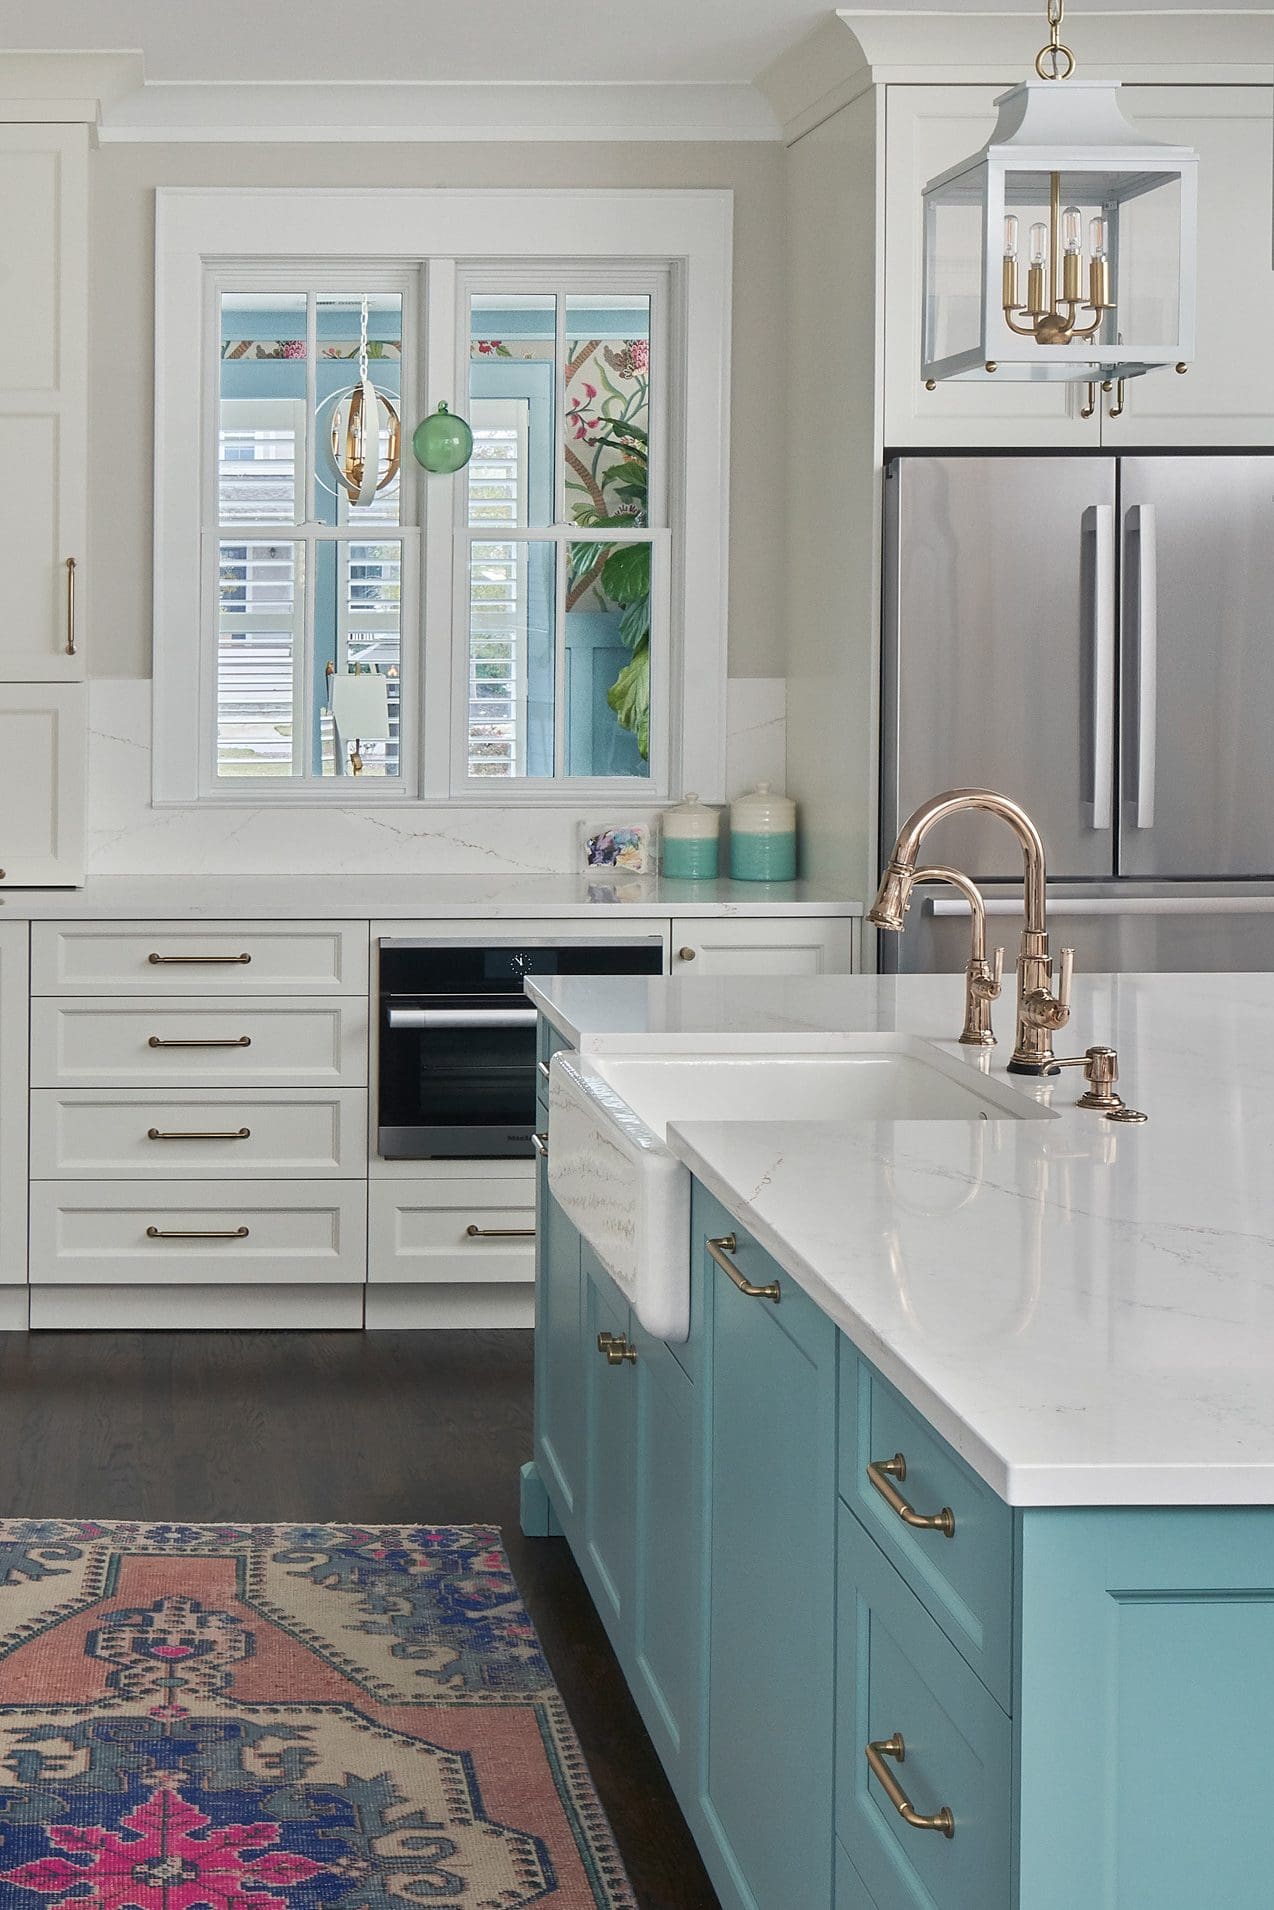 A kitchen with a cast iron farmhouse sink in a turquoise island with a gold faucet.